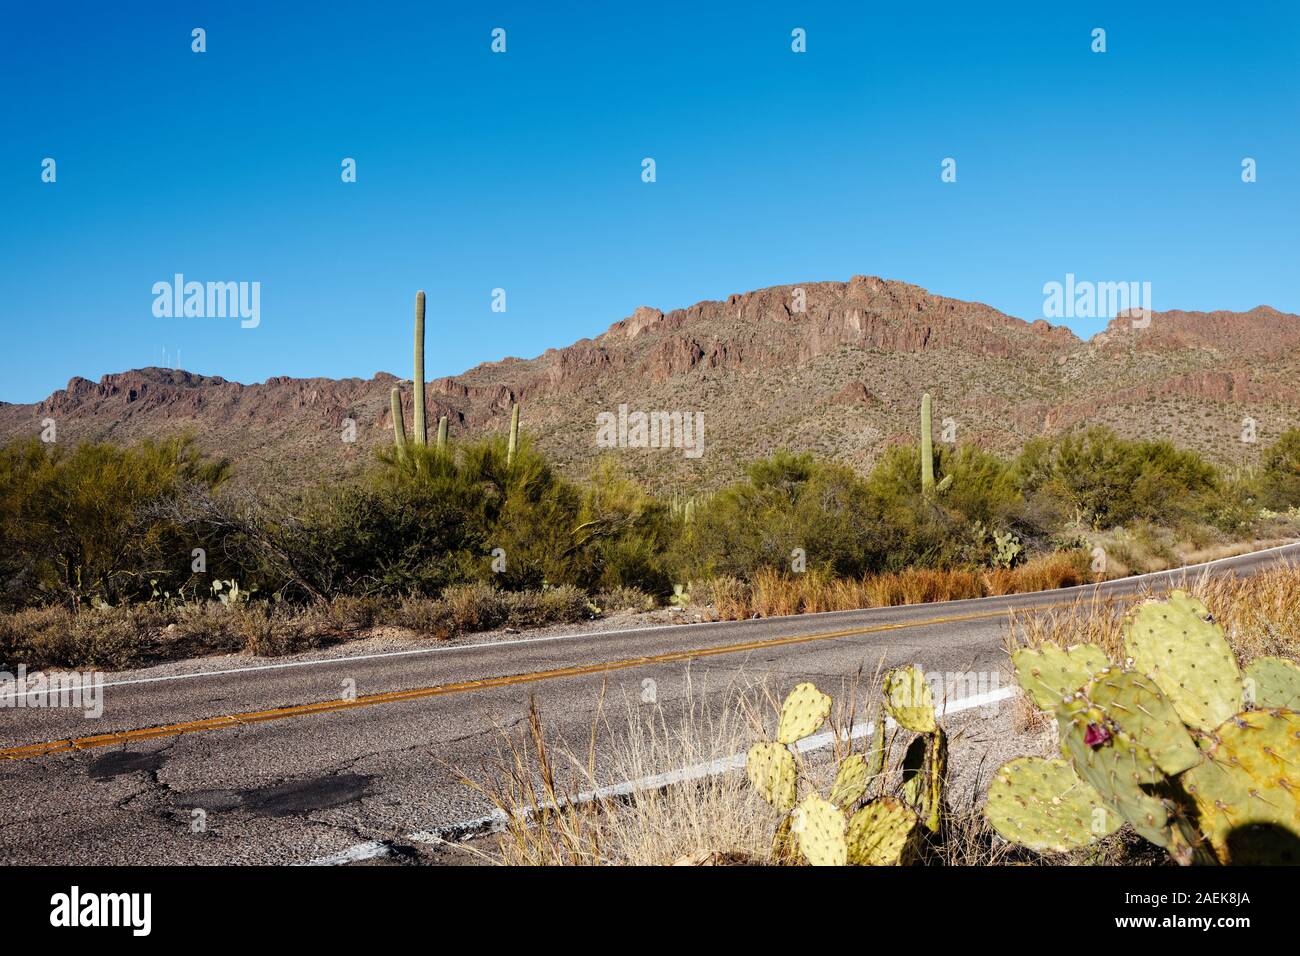 Cracked desert road in Southern Arizona with cacti. Stock Photo